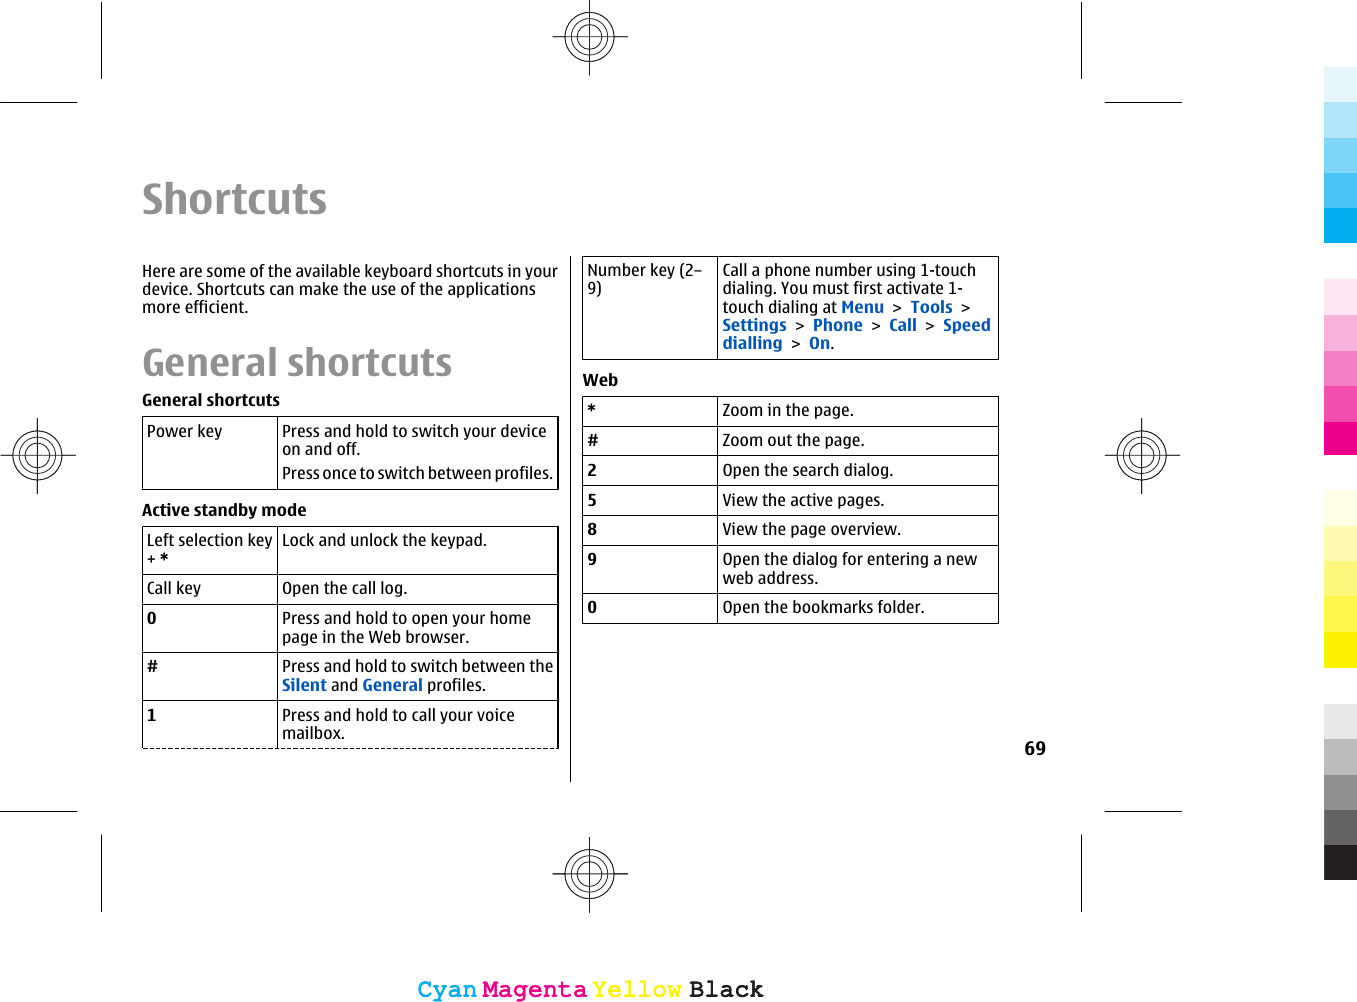 ShortcutsHere are some of the available keyboard shortcuts in yourdevice. Shortcuts can make the use of the applicationsmore efficient.General shortcutsGeneral shortcutsPower key Press and hold to switch your deviceon and off.Press once to switch between profiles.Active standby modeLeft selection key+ *Lock and unlock the keypad.Call key Open the call log.0Press and hold to open your homepage in the Web browser.#Press and hold to switch between theSilent and General profiles.1Press and hold to call your voicemailbox.Number key (2–9)Call a phone number using 1-touchdialing. You must first activate 1-touch dialing at Menu &gt; Tools &gt;Settings &gt; Phone &gt; Call &gt; Speeddialling &gt; On.Web*Zoom in the page.#Zoom out the page.2Open the search dialog.5View the active pages.8View the page overview.9Open the dialog for entering a newweb address.0Open the bookmarks folder.69CyanCyanMagentaMagentaYellowYellowBlackBlackCyanCyanMagentaMagentaYellowYellowBlackBlack